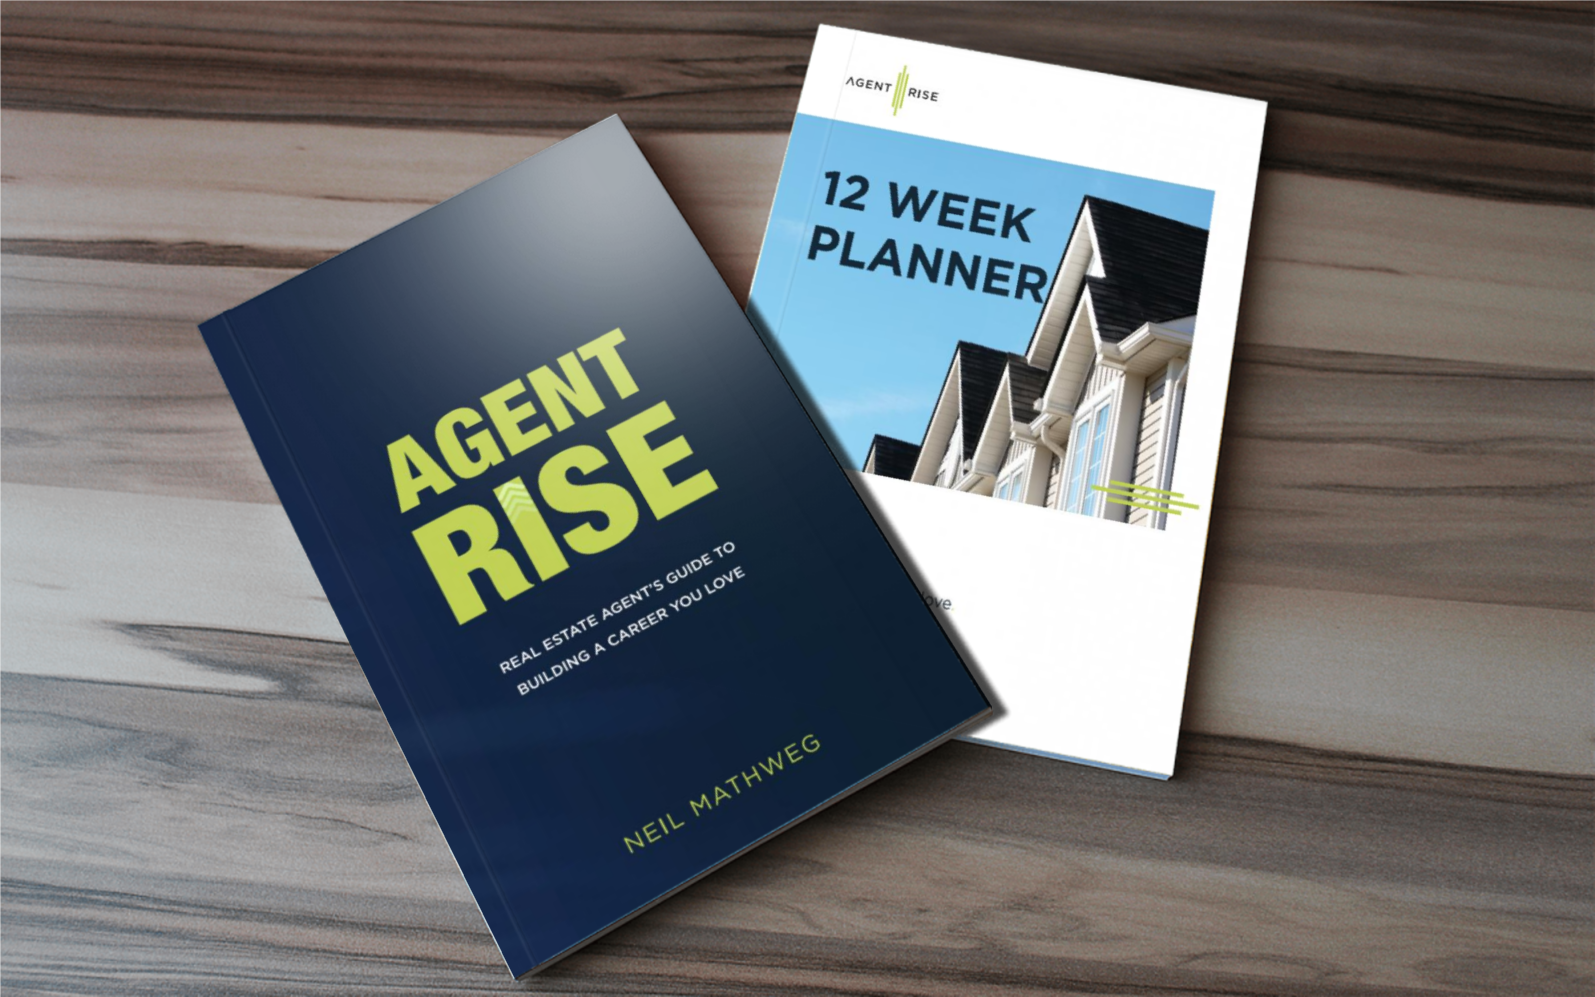 Two books on a wooden table, one titled 'AGENT RISE' by Neil Mathweg and another titled '12 WEEK PLANNER' by Agent Rise."